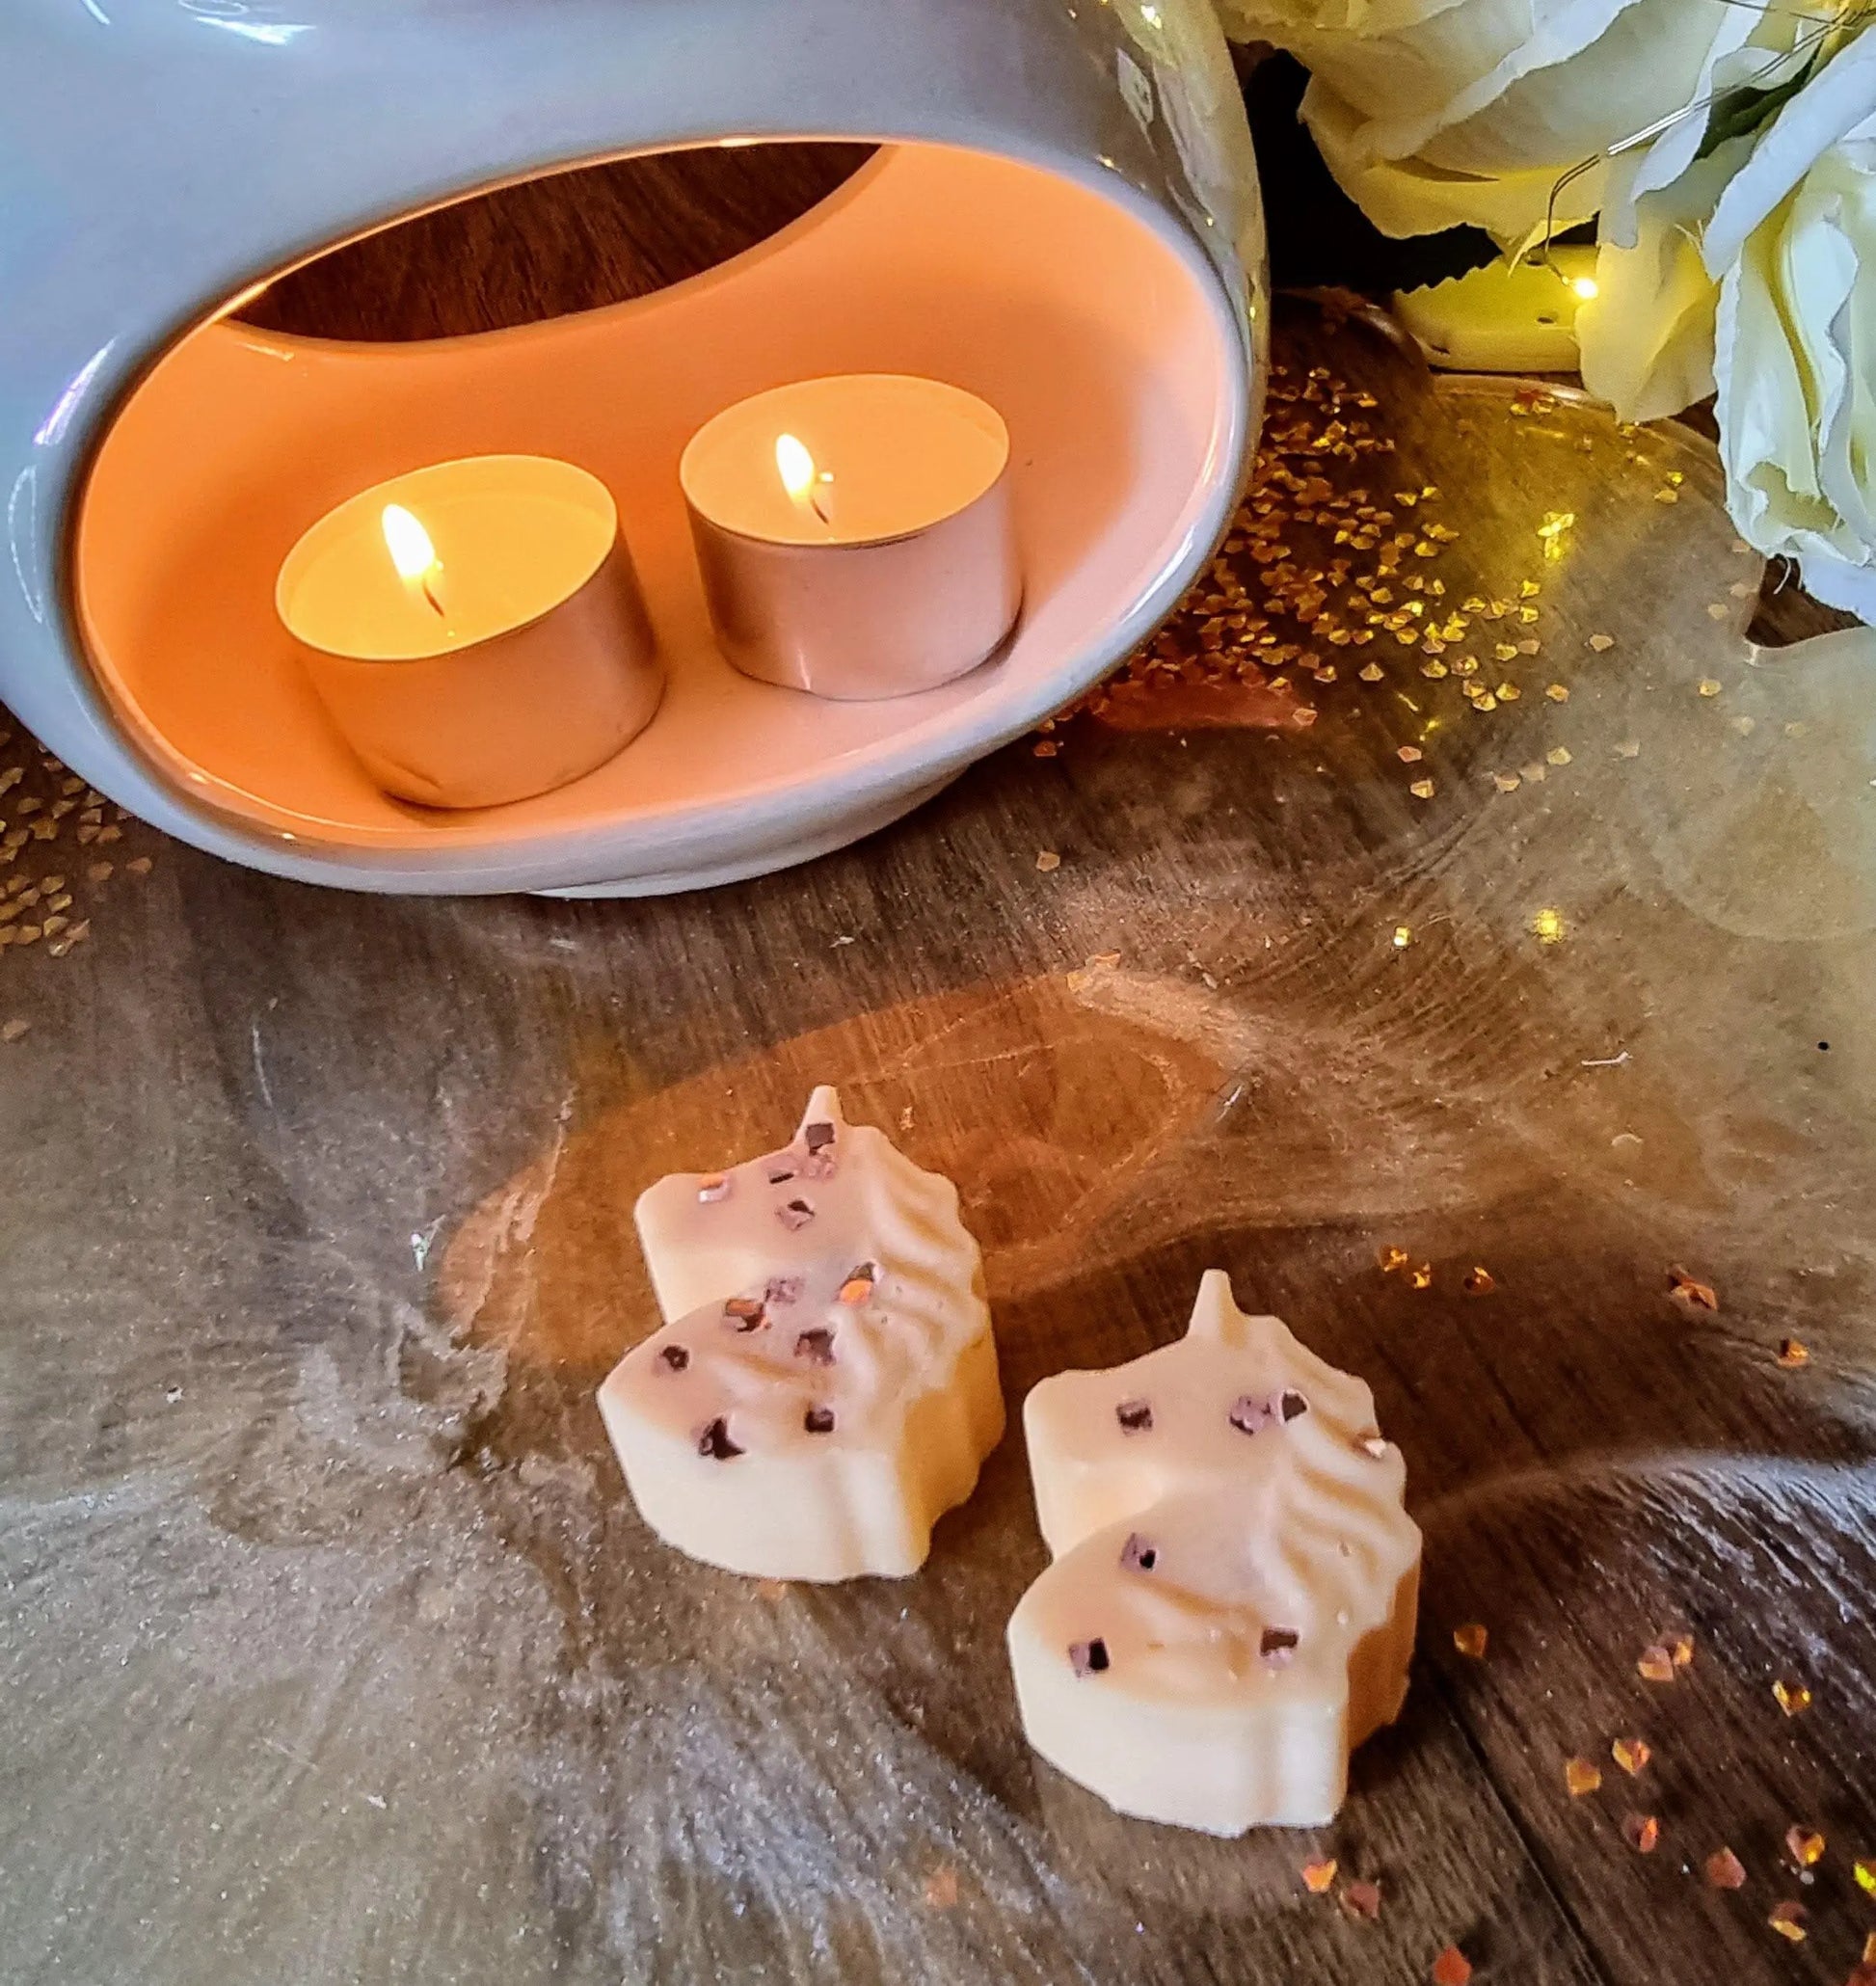 Autumn Leaves Wax Melts Scent Sational Wax melts